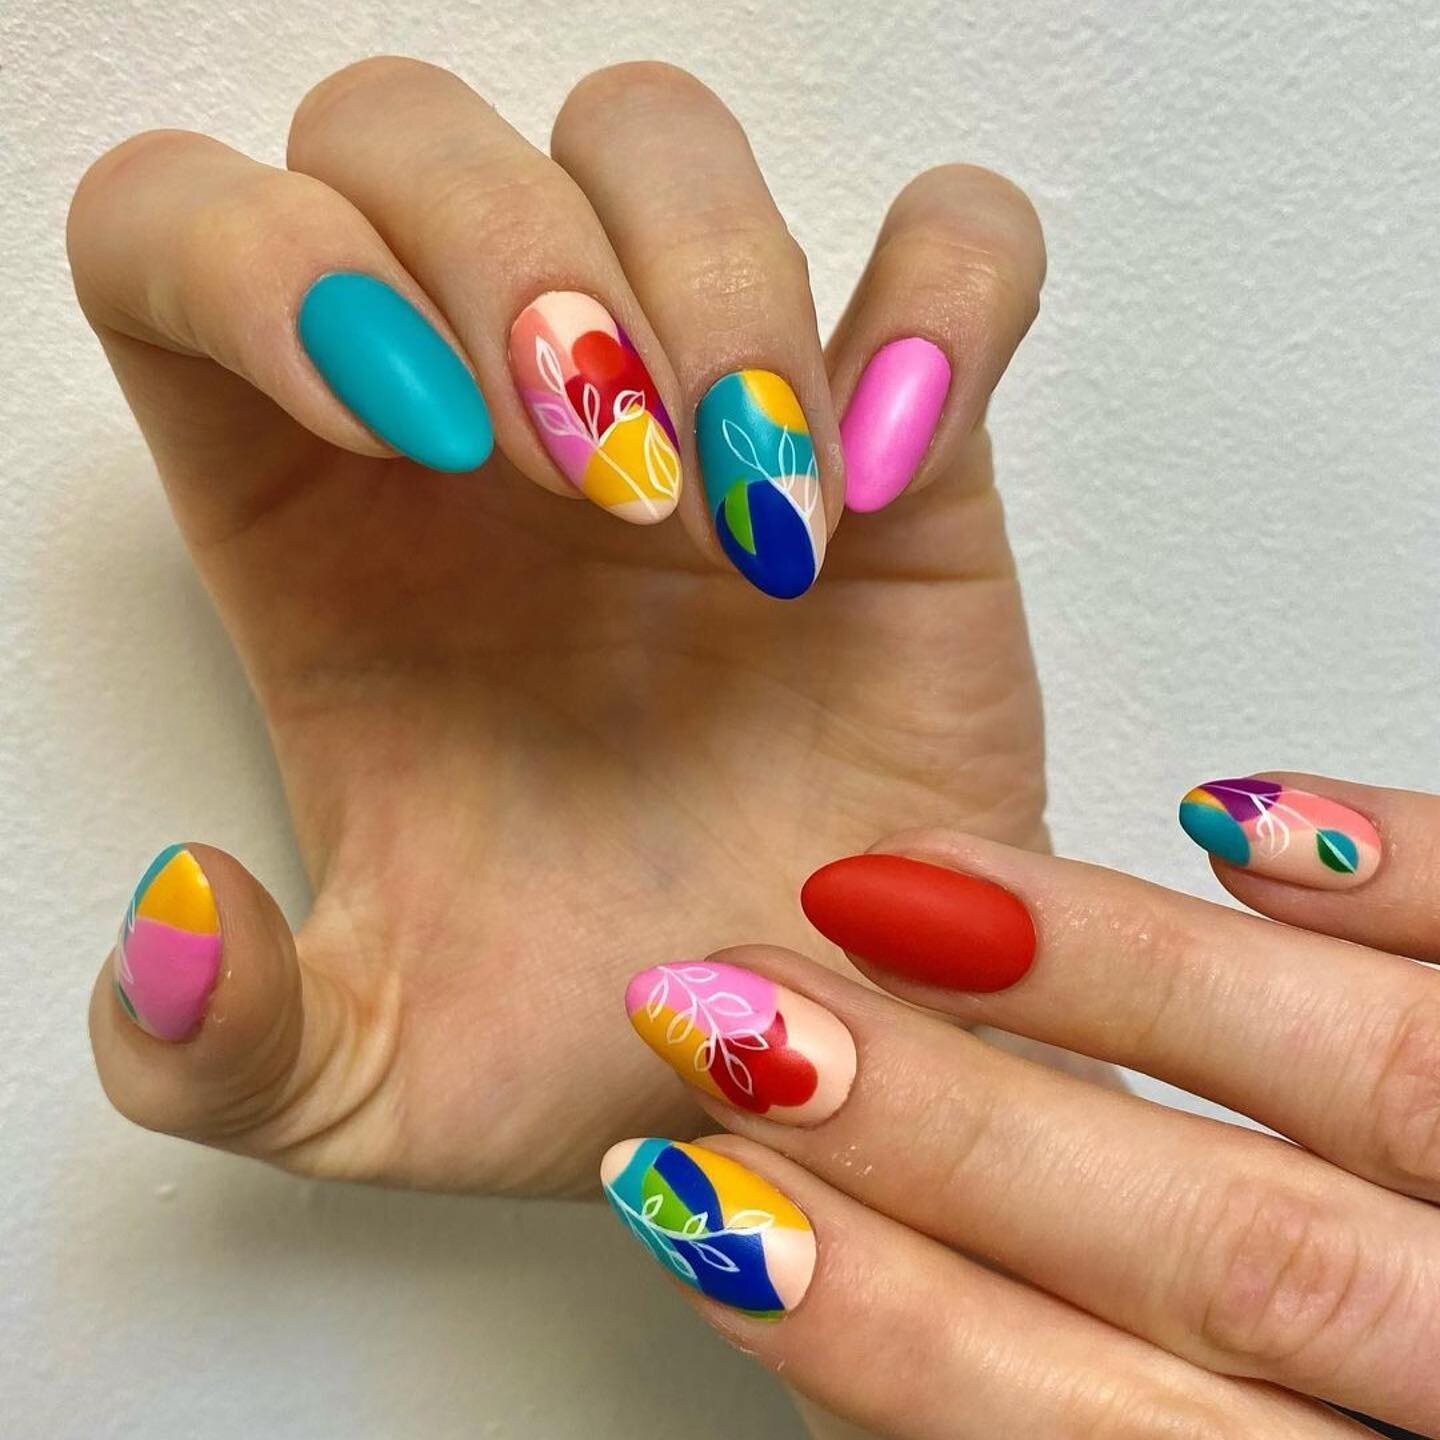 More nail art inspired by my Tropical Sunset pots - this time Tropical Sunset Blue too! Thank you for sharing @asp_klaudia_rafinska - they are gorgeous. Swipe to see my original pots.
&bull;
#Repost @asp_klaudia_rafinska with @make_repost
・・・
Kolooor